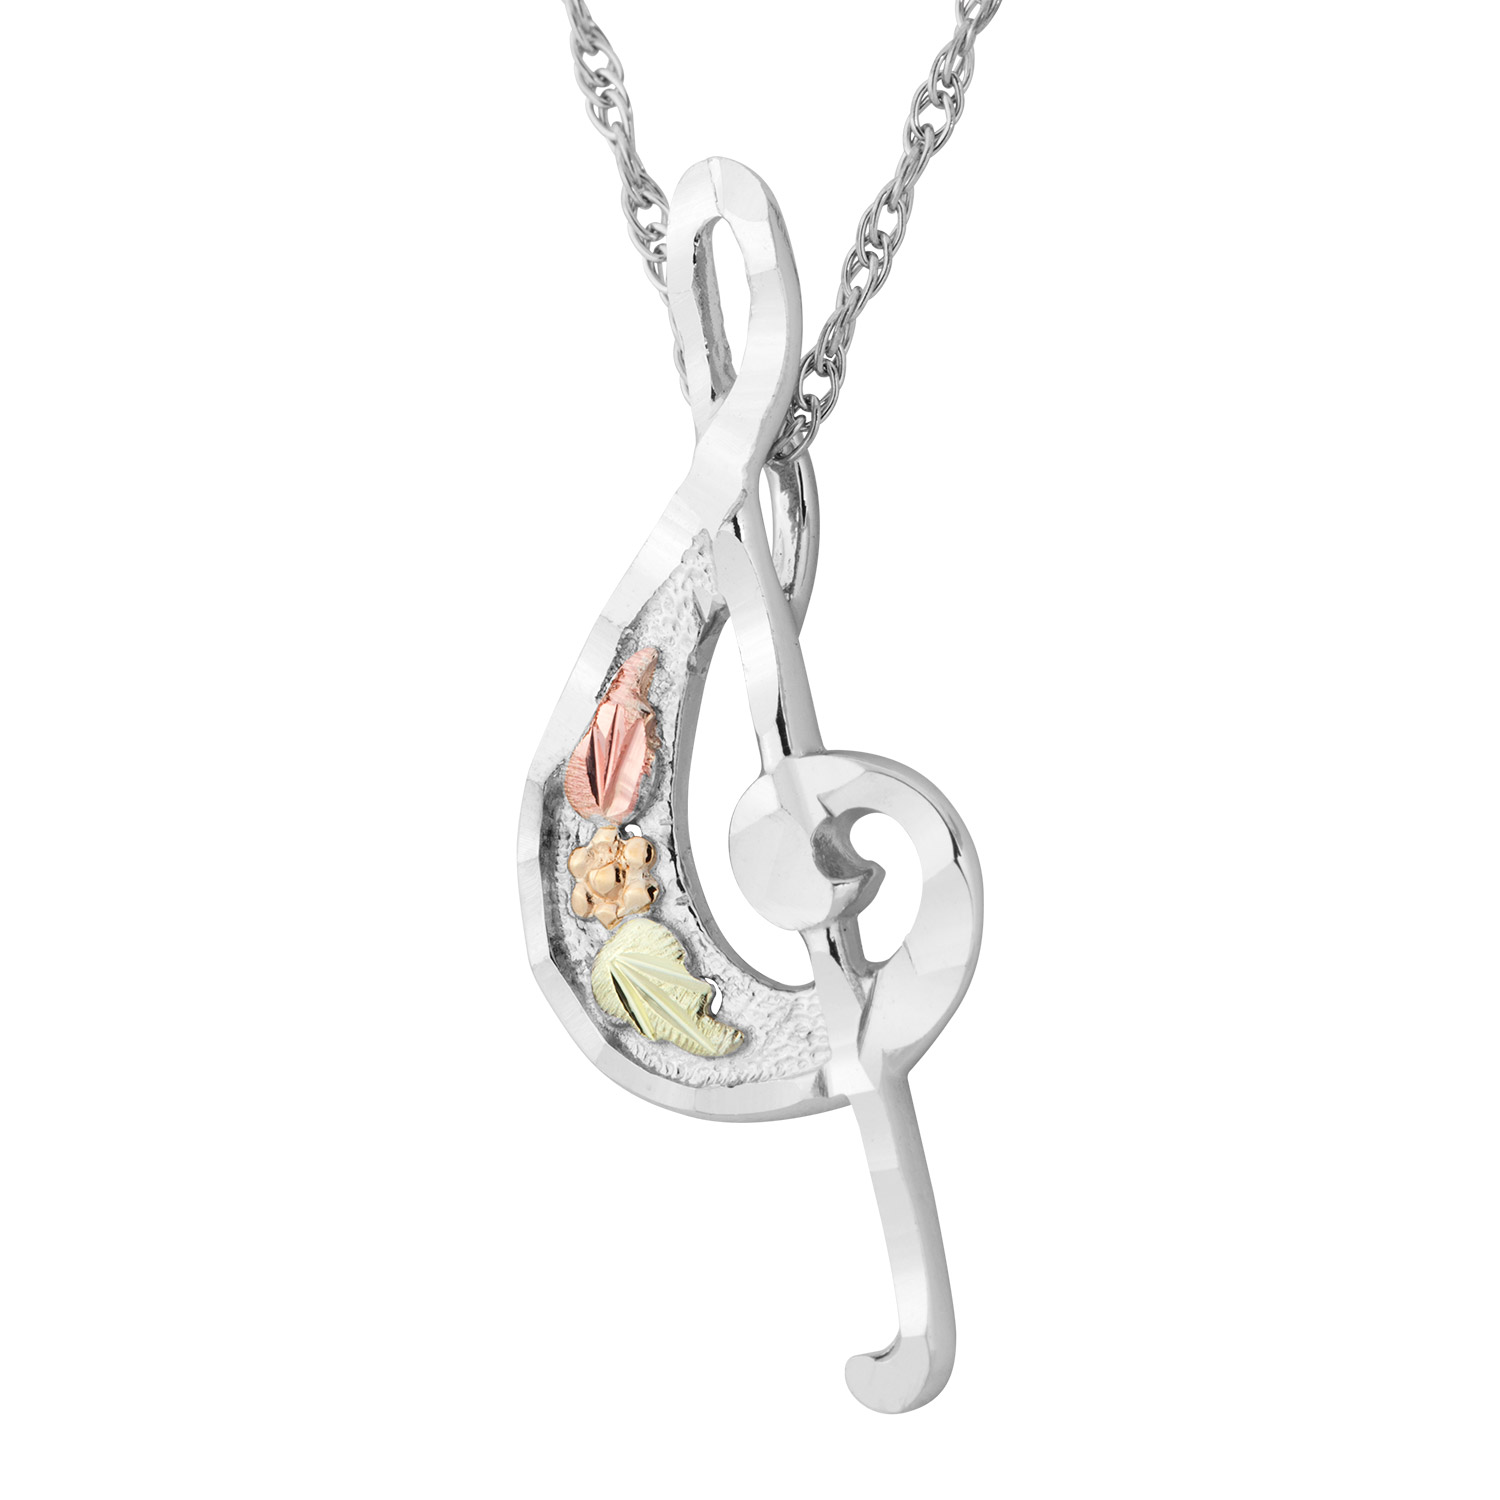 Diamond-Cut Treble Clef Pendant Necklace, Sterling Silver, 12k Green and Rose Gold Black Hills Gold Motif